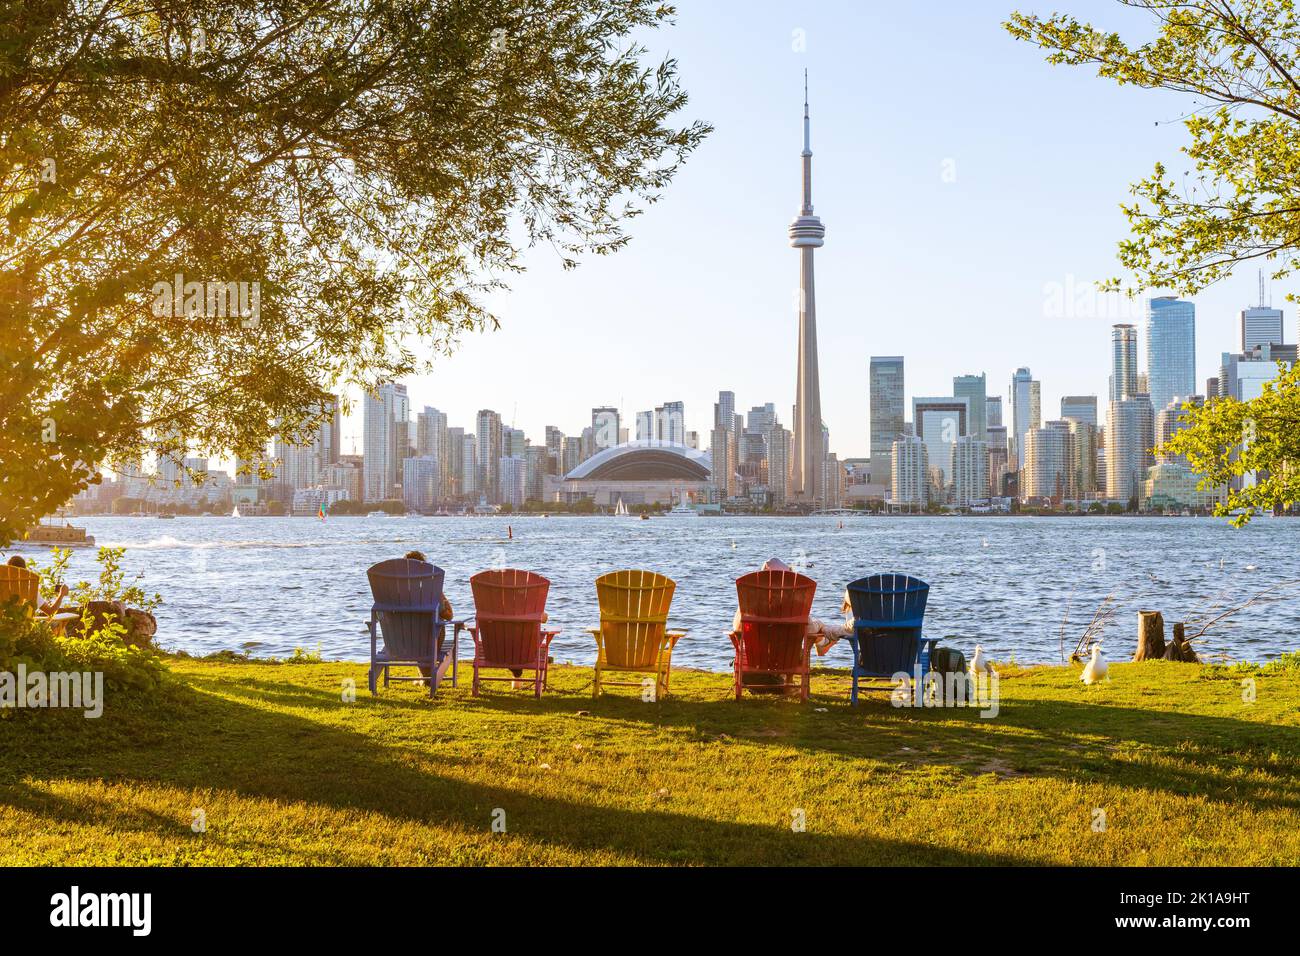 Colorful adirondack chairs on Toronto Island Park at sunset time. Toronto City downtown skyline in the background. Ontario, Canada. Stock Photo